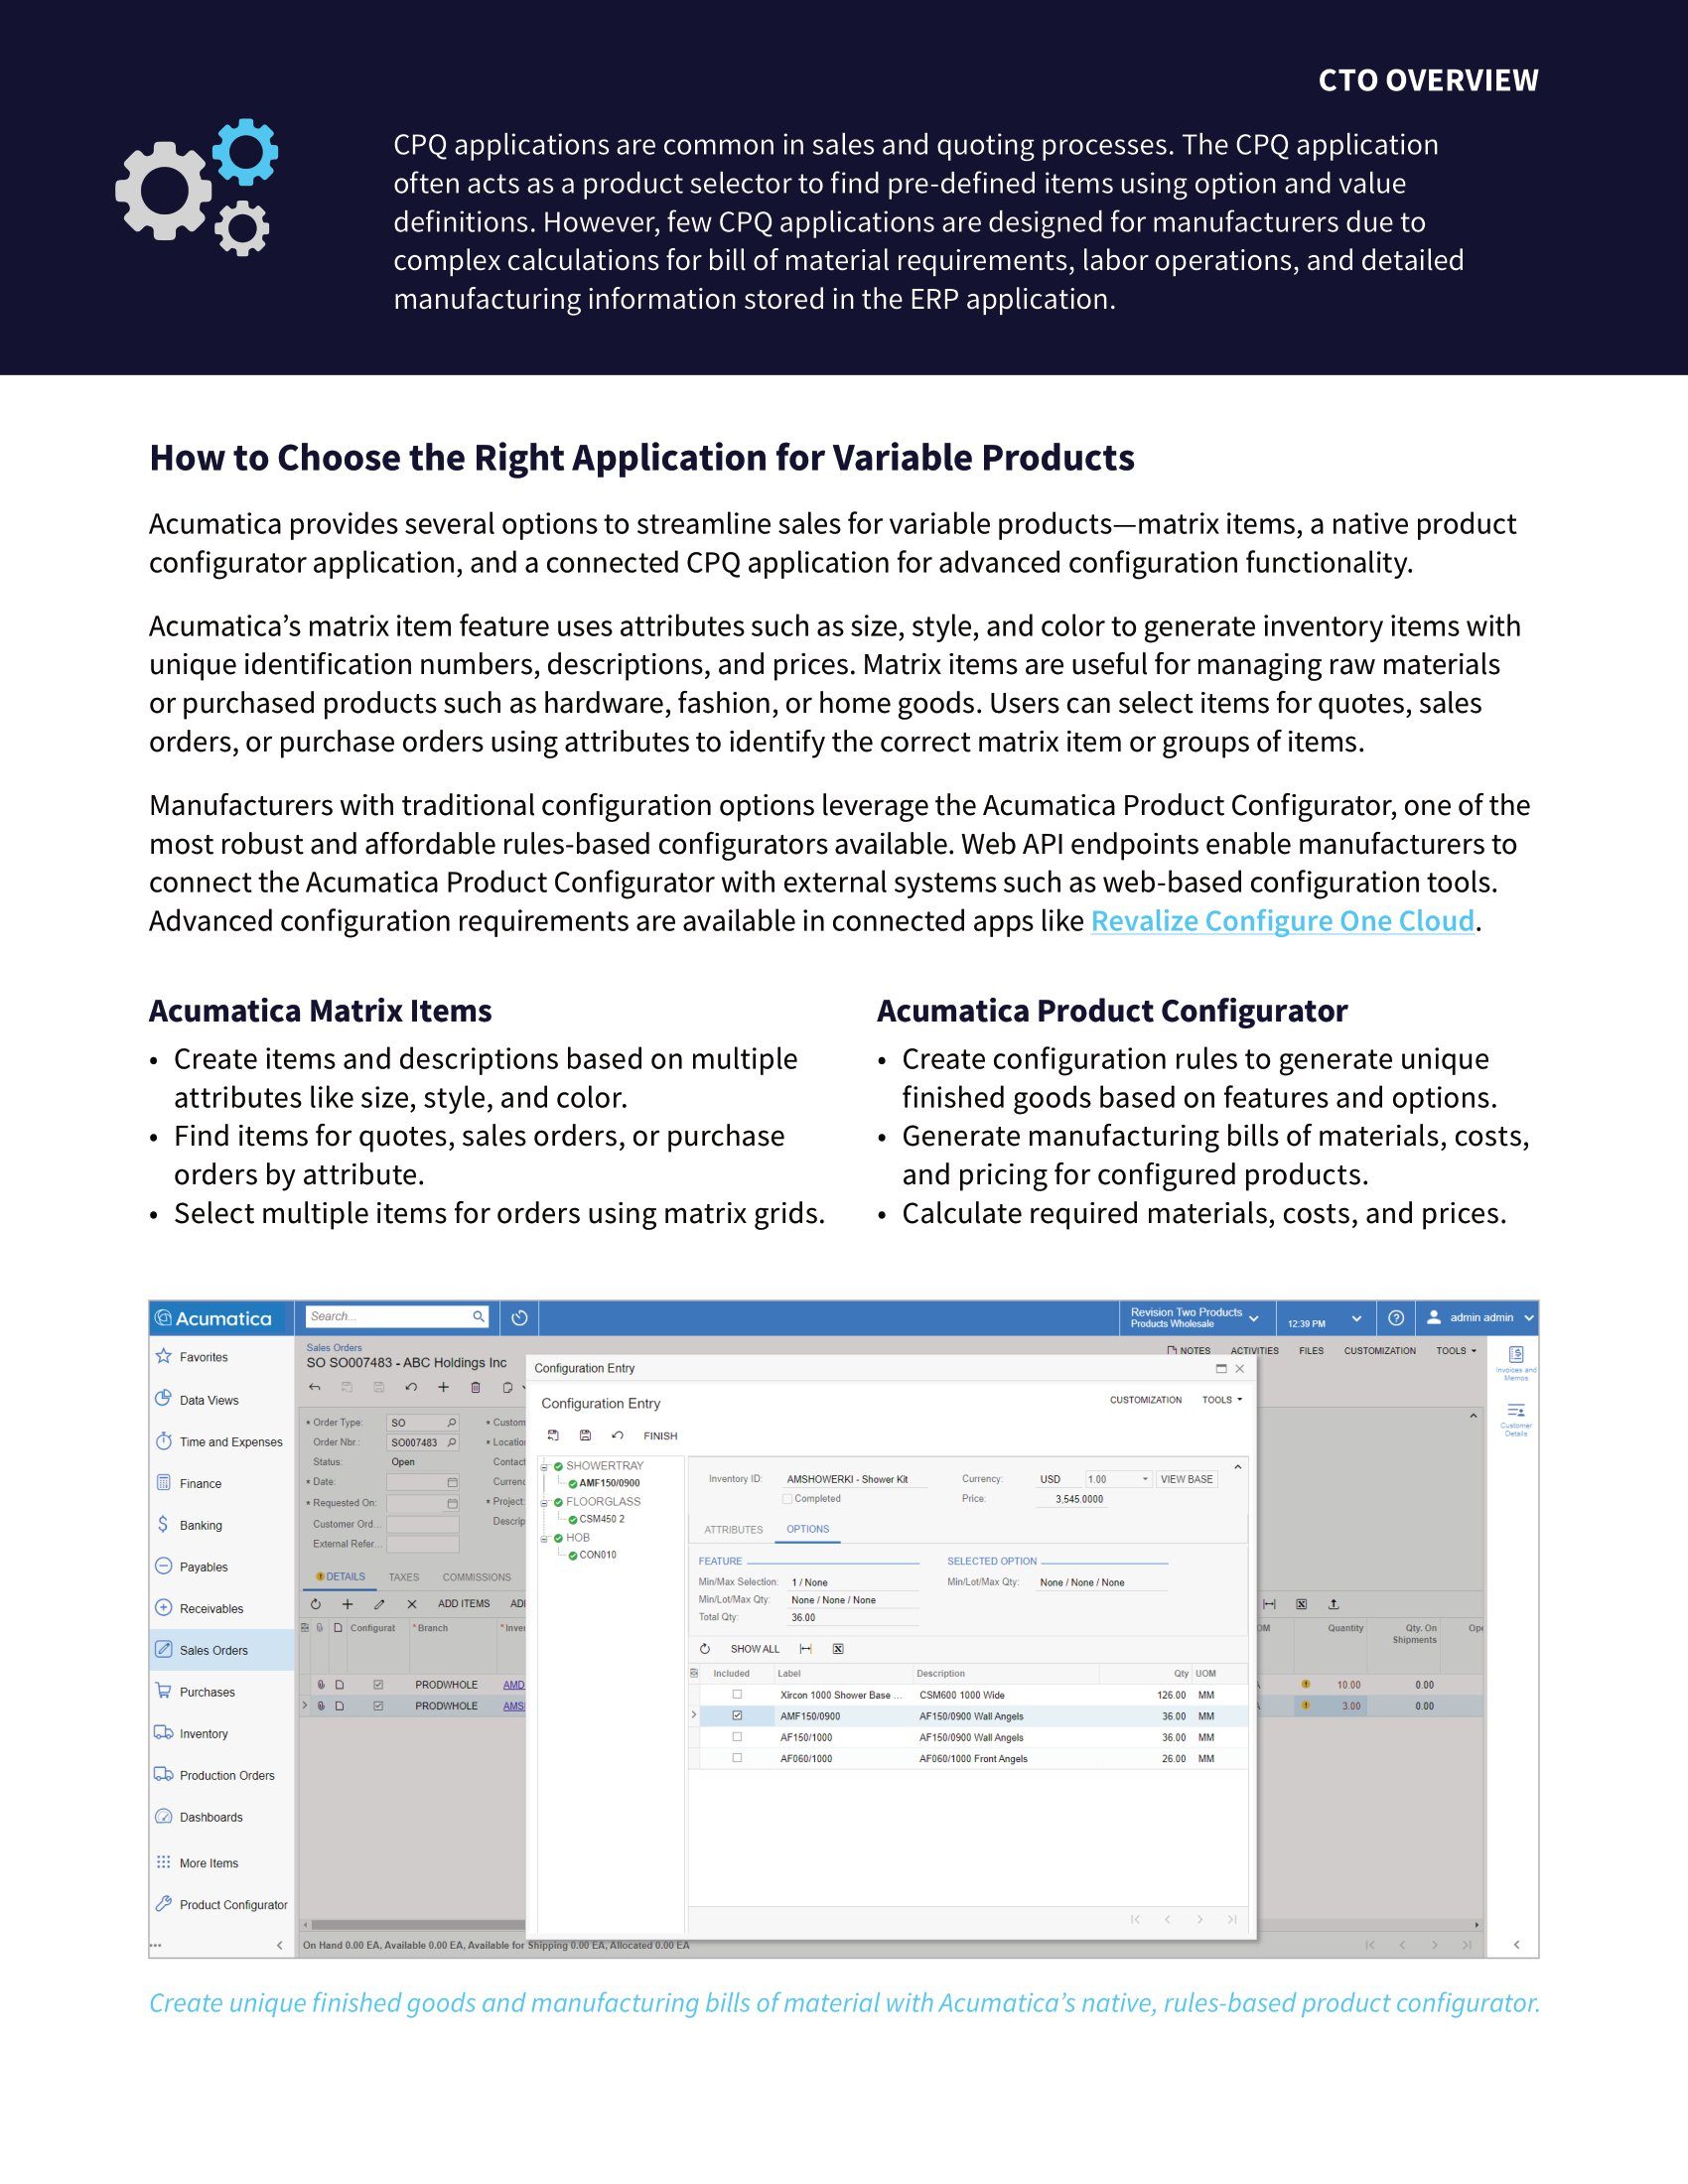 Acumatica’s Configure-to-Order Manufacturing, page 1